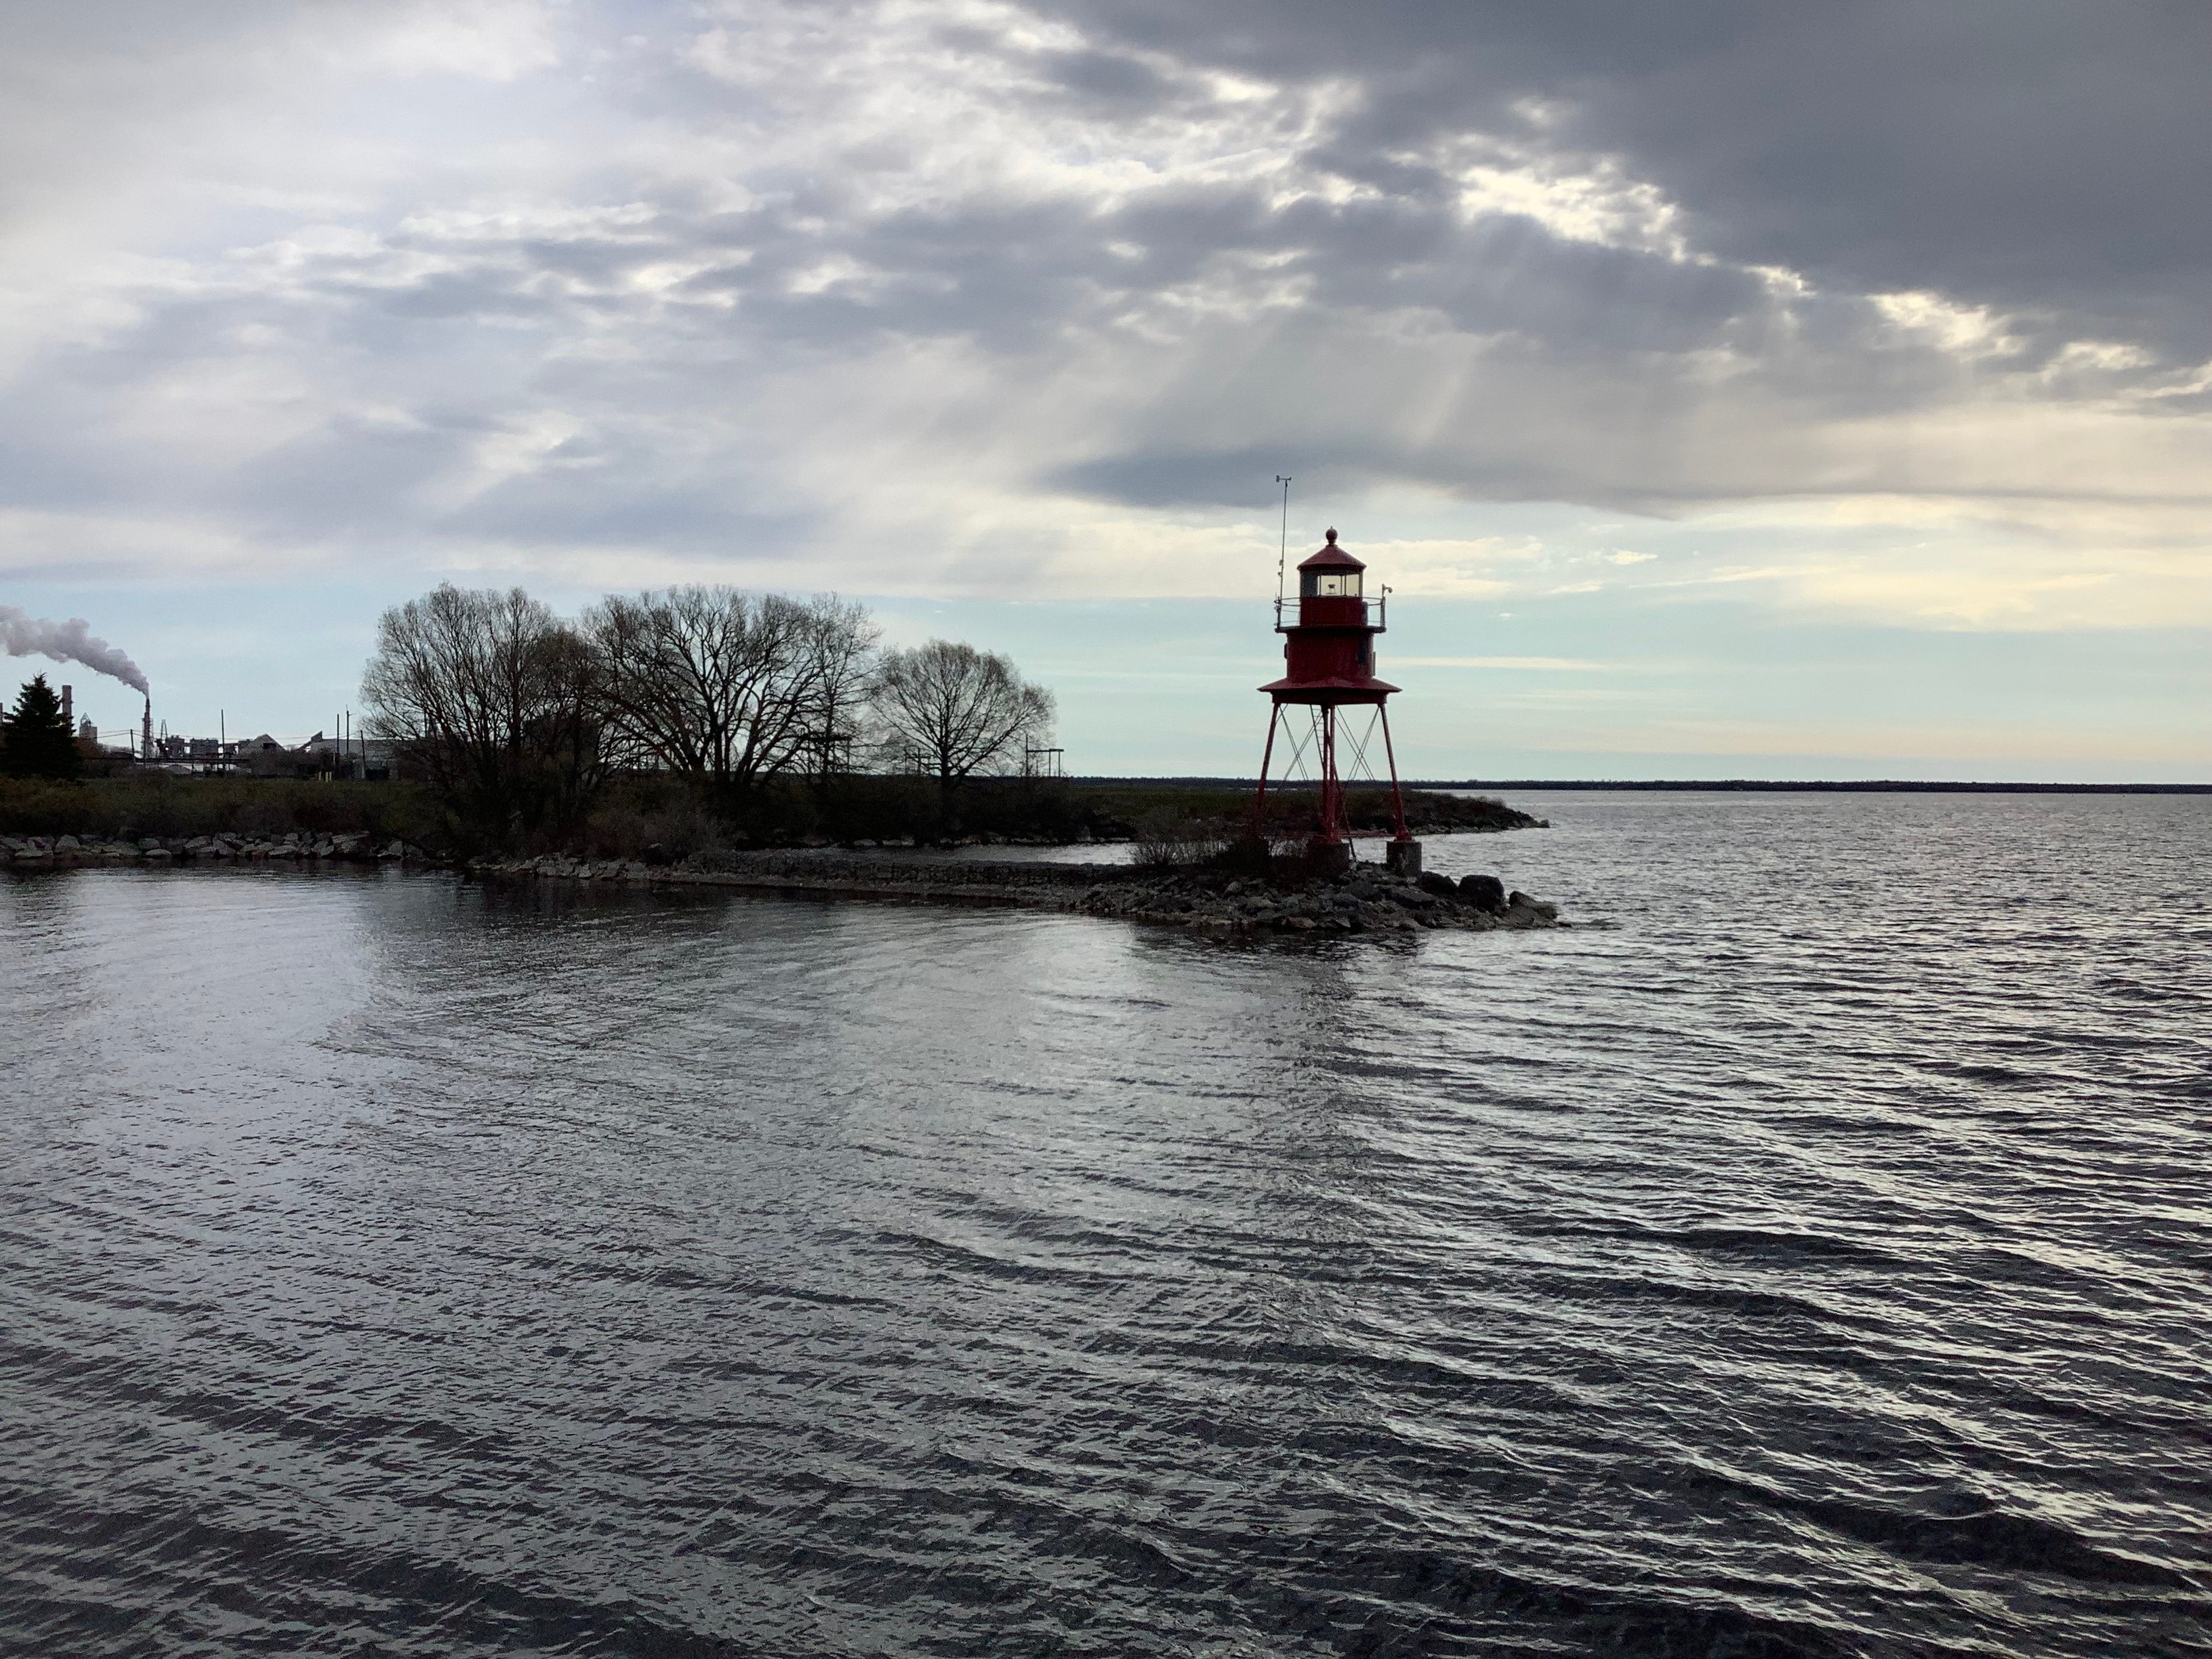 A view across Thunder Bay, with the shoreline in the distance. A red lighthouse sits at the edge of the water.